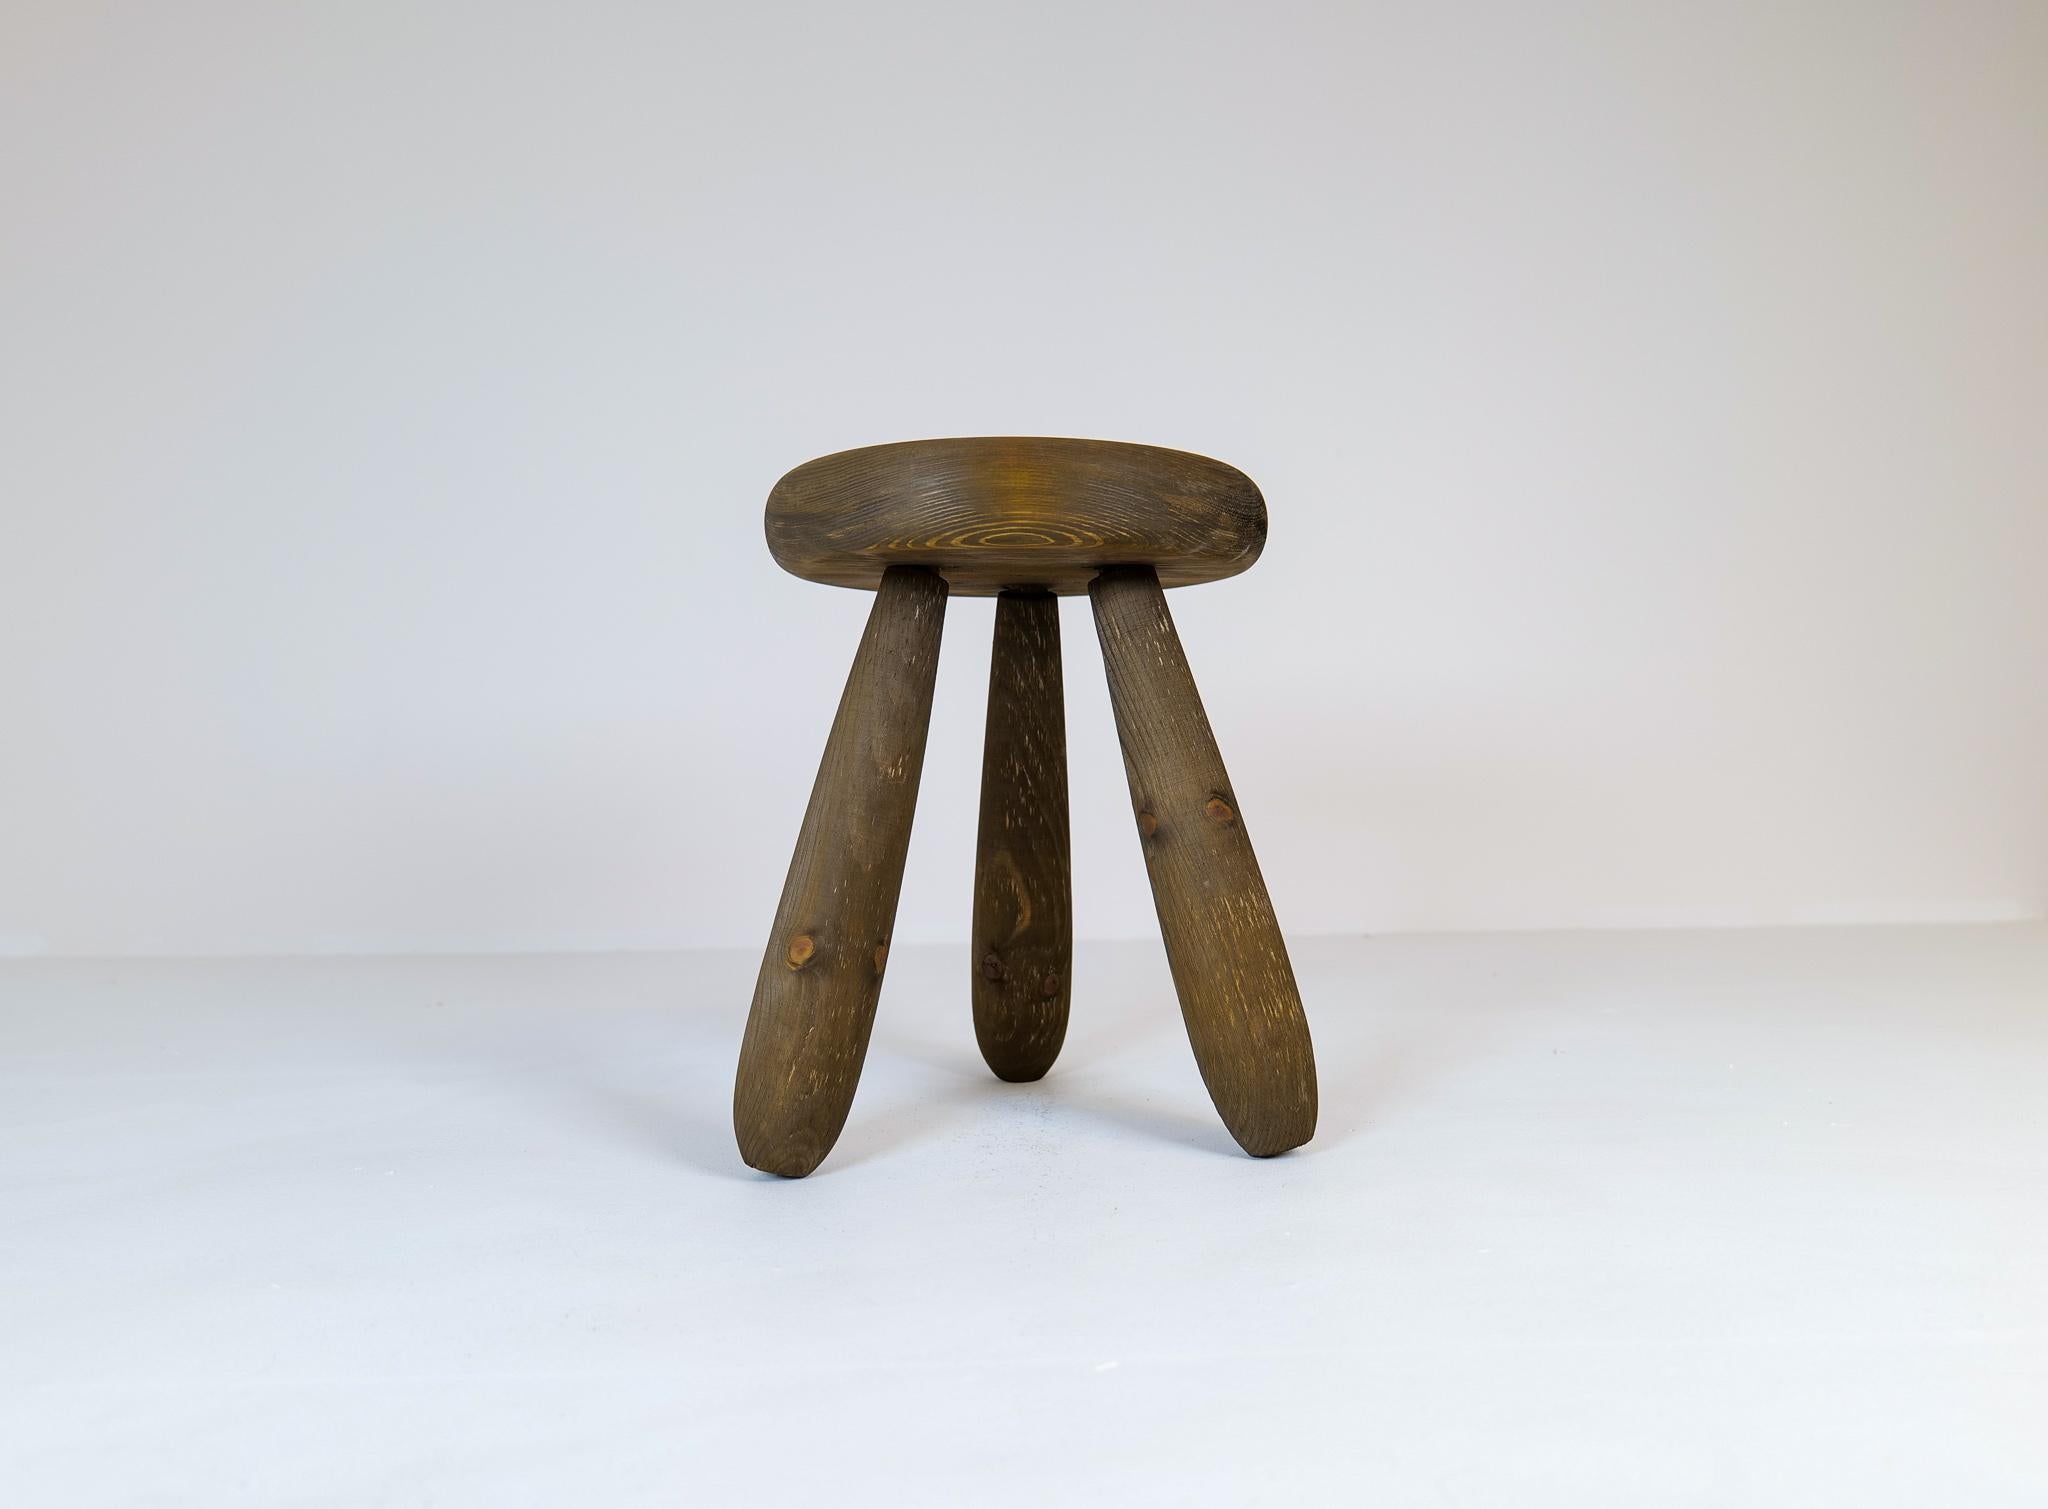 A stool in stained solid pine with rare complexity in the different colors of the wood.
This stool is a good example of the good craftsmanship and minimalistic stile to come in Scandinavian furniture. 

 Very good original condition with a